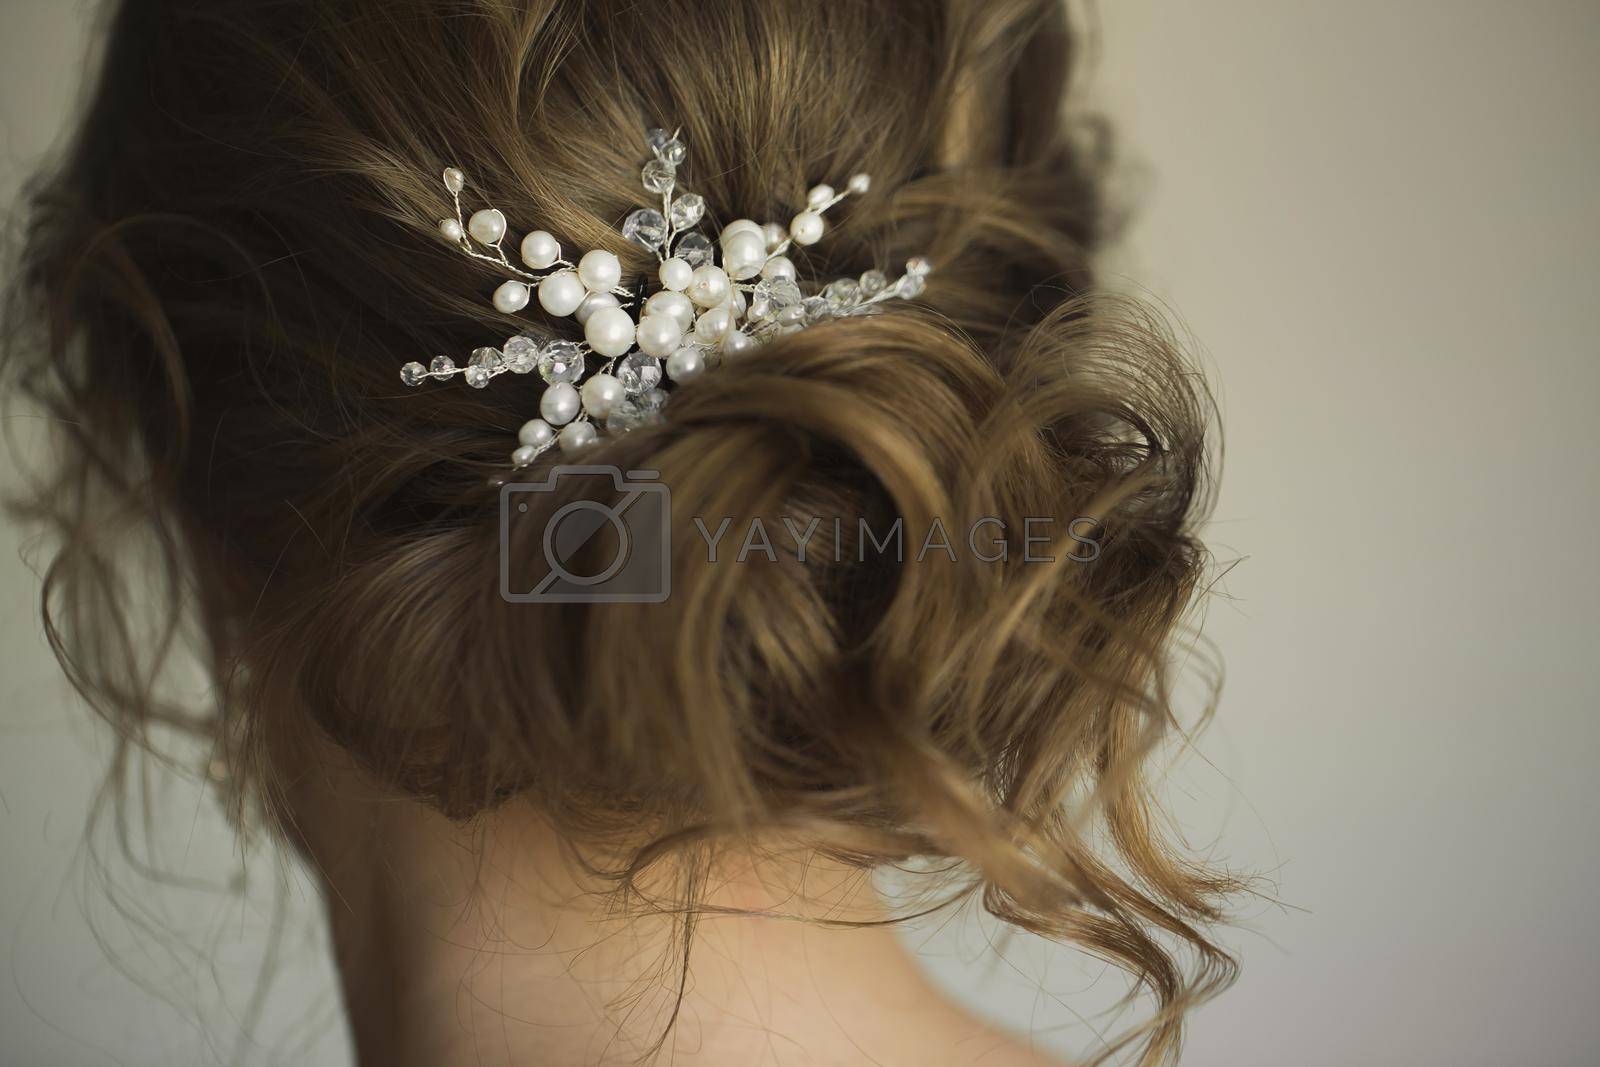 Royalty free image of Bridal wedding hairstyle with jewelry. Elegant hair accessorie by StudioPeace